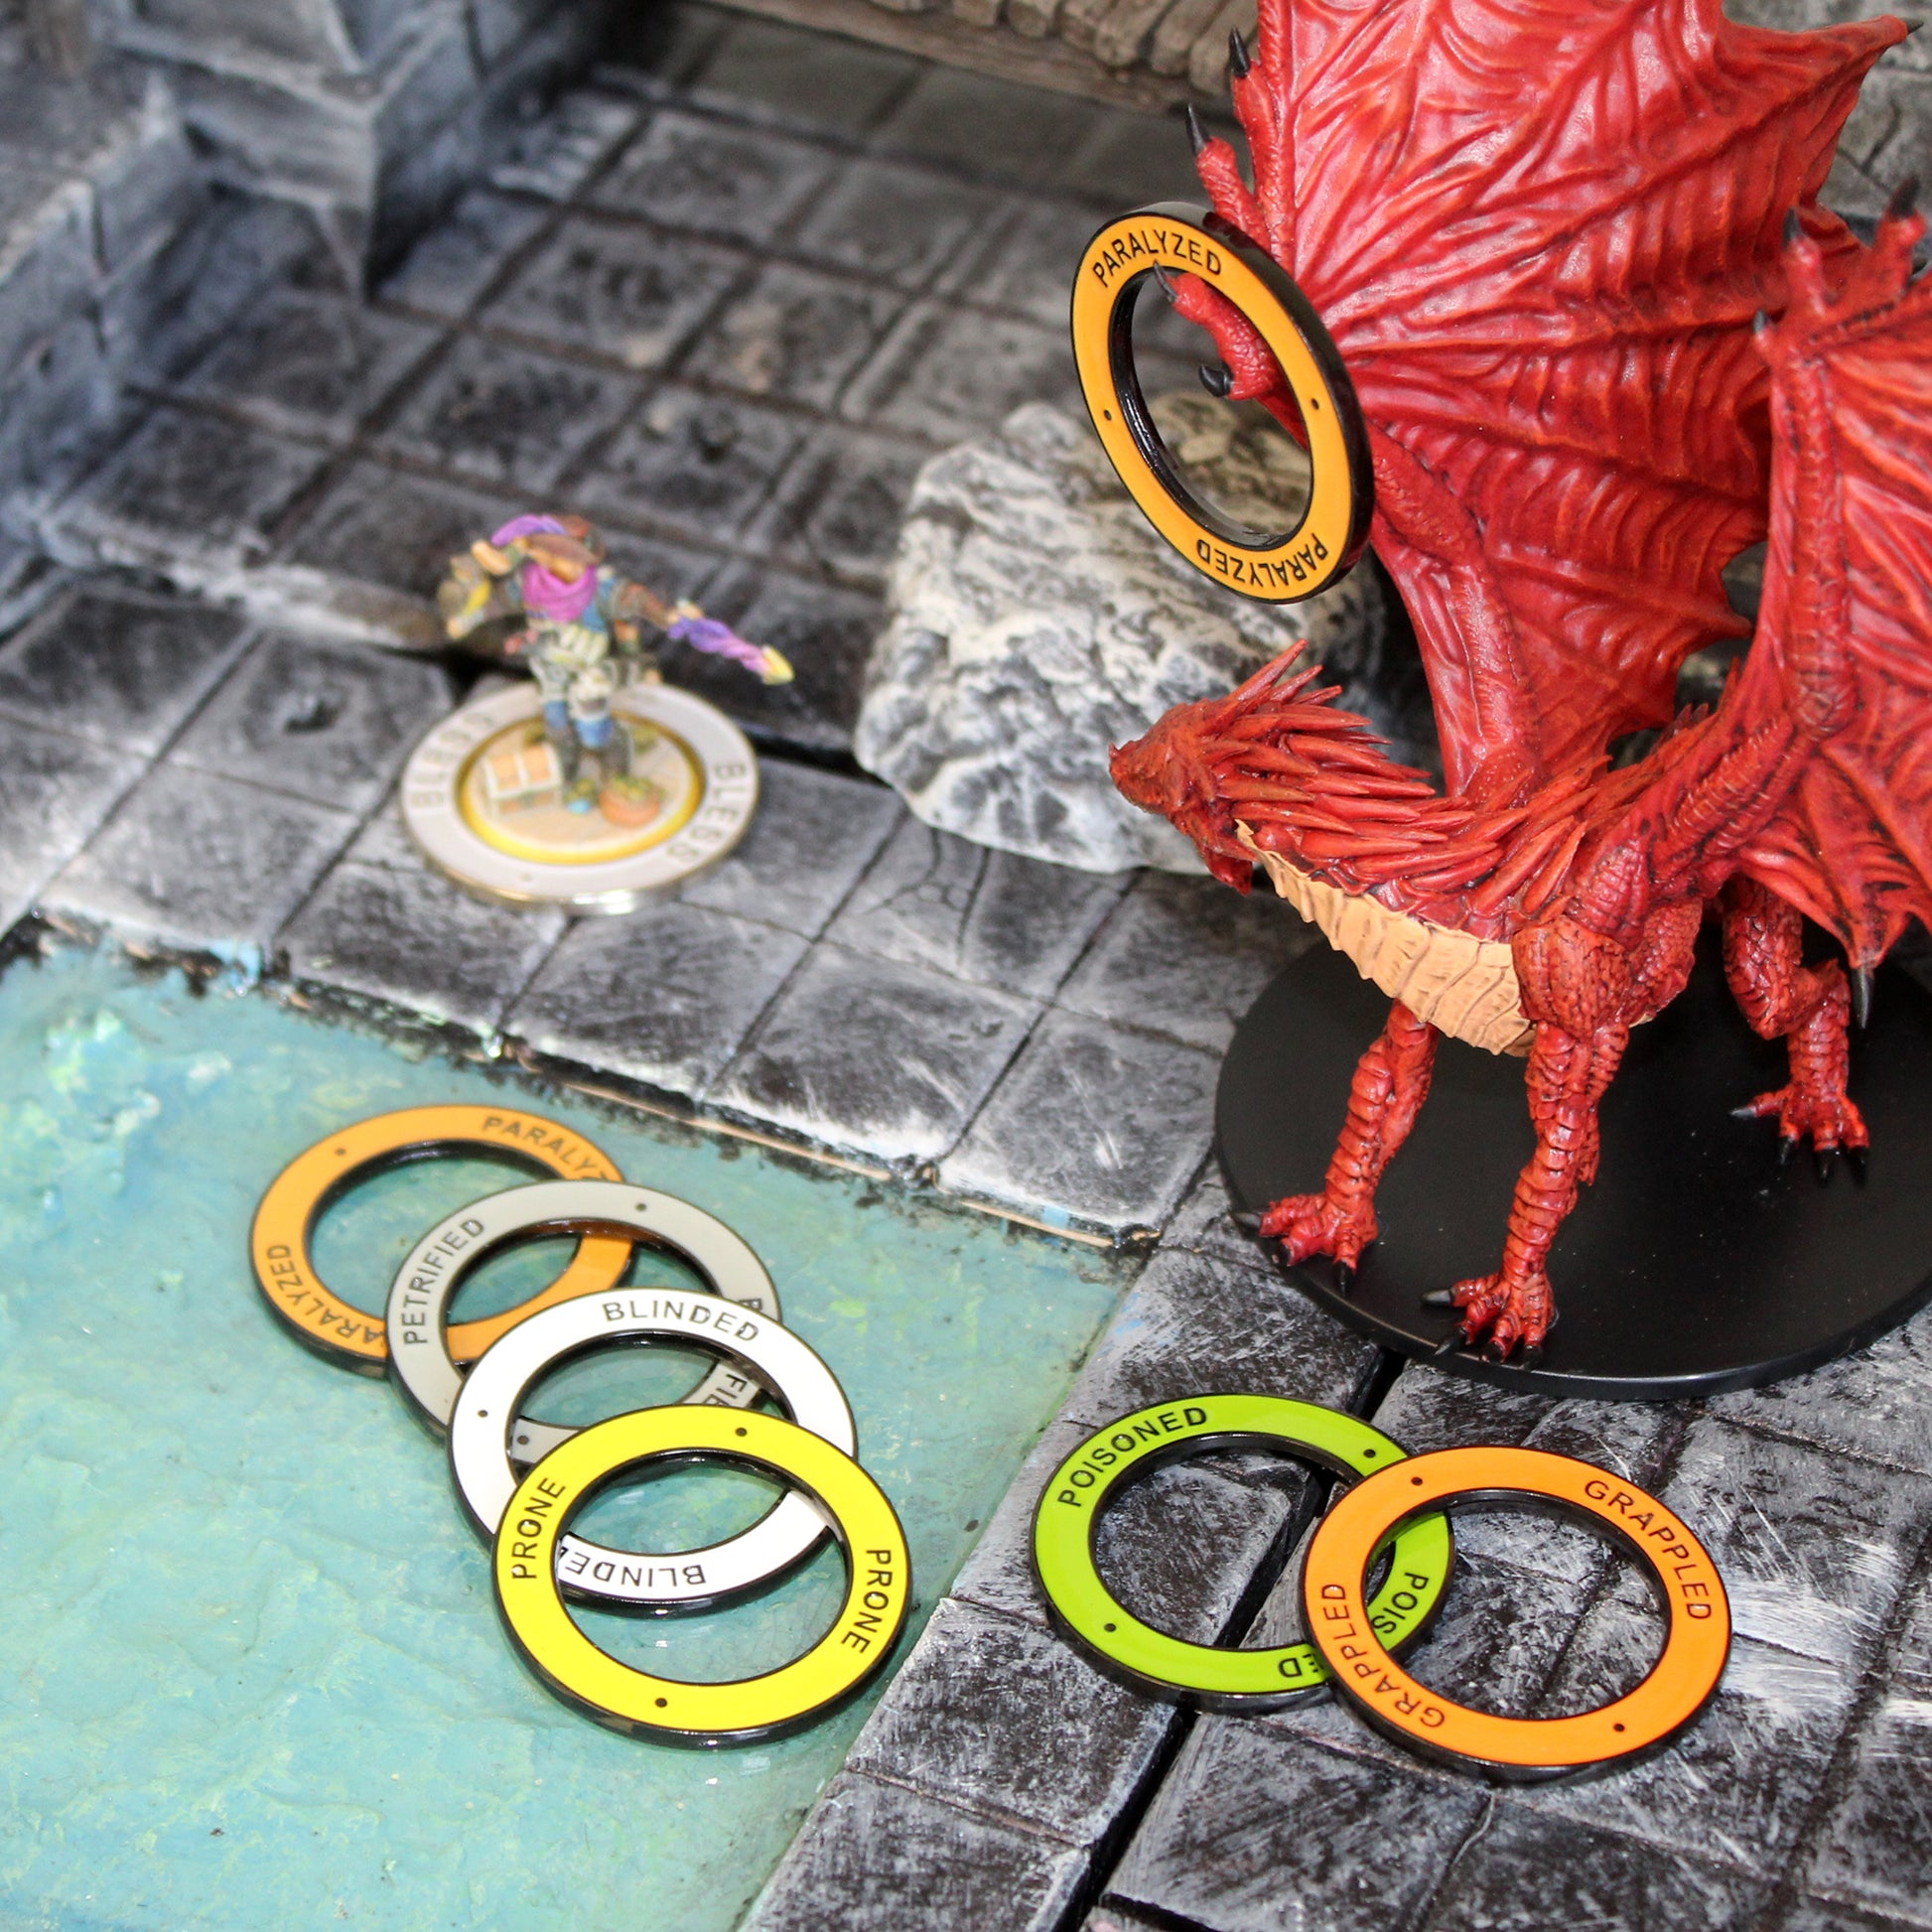 Dragon Ring Box and Mini Dice set for RPG